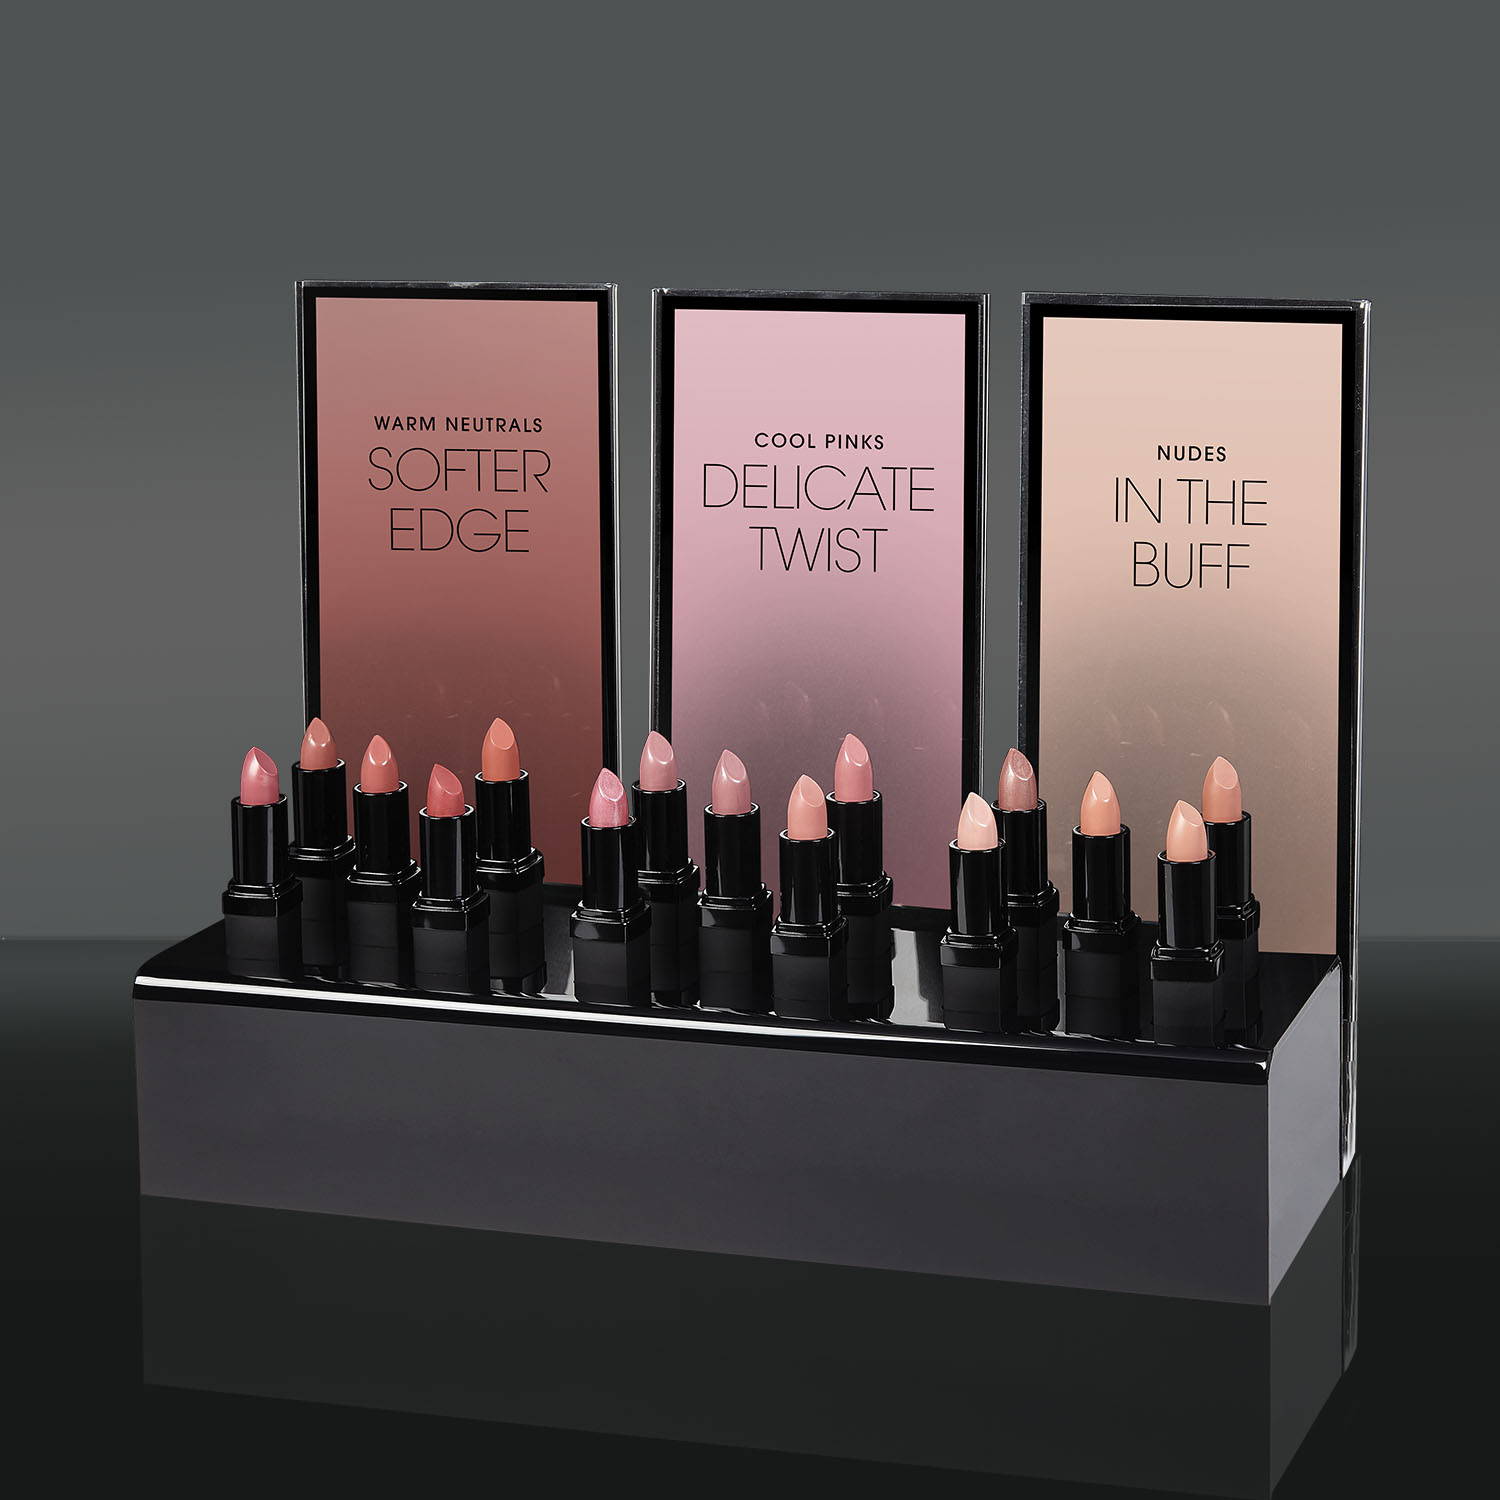 Platinum Bar, a counter top display that holds 15 lipsticks. It measures in inches 14 by 11.25 by 4